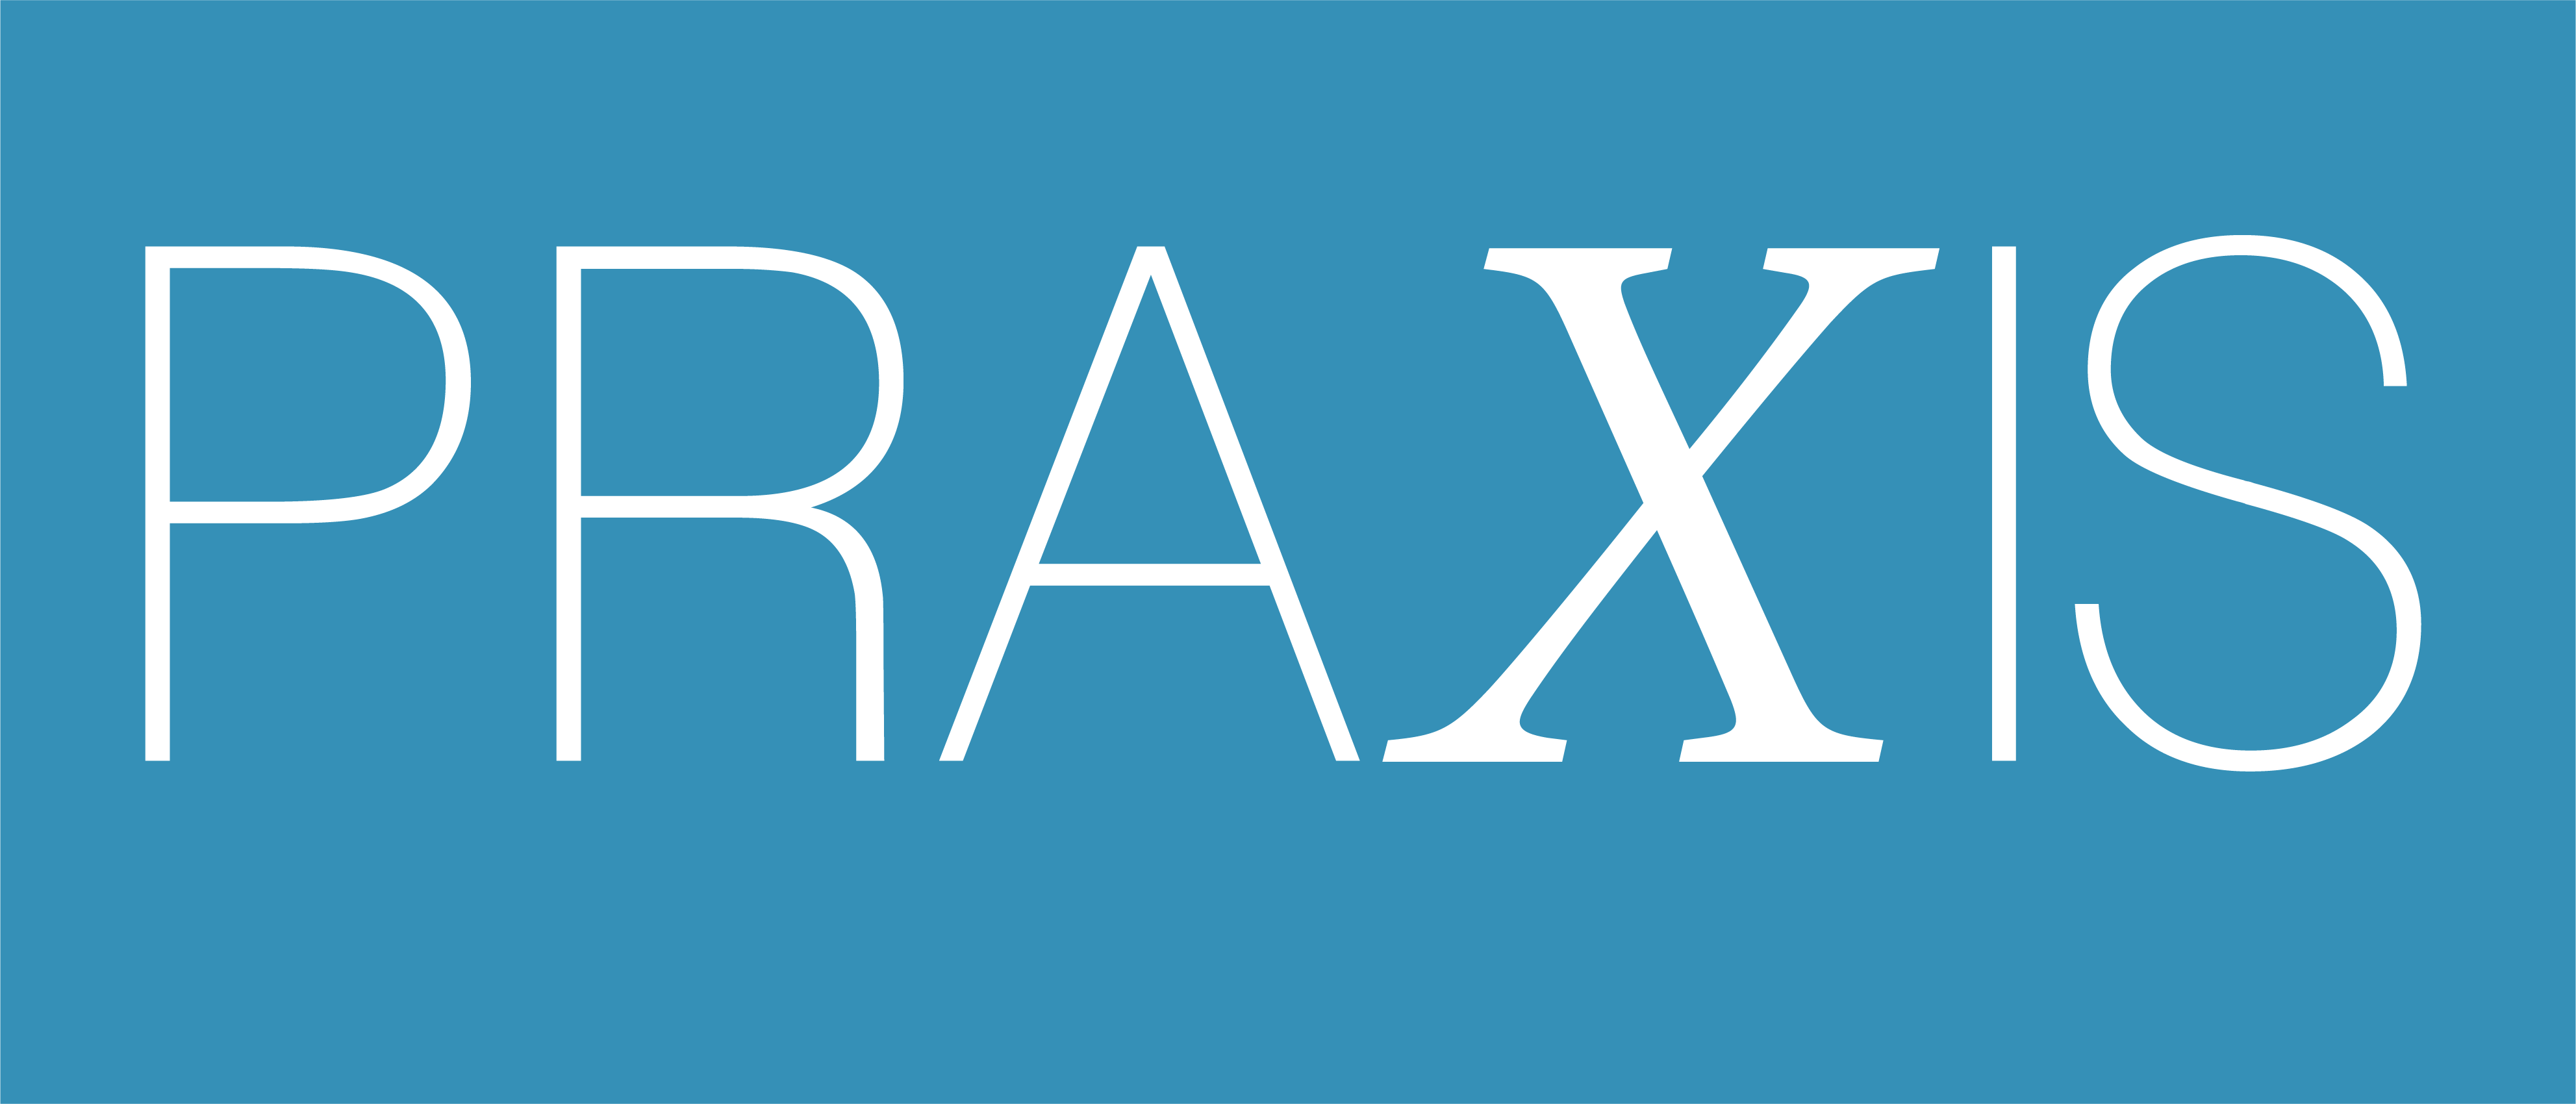 Praxis Logo - Terms of use